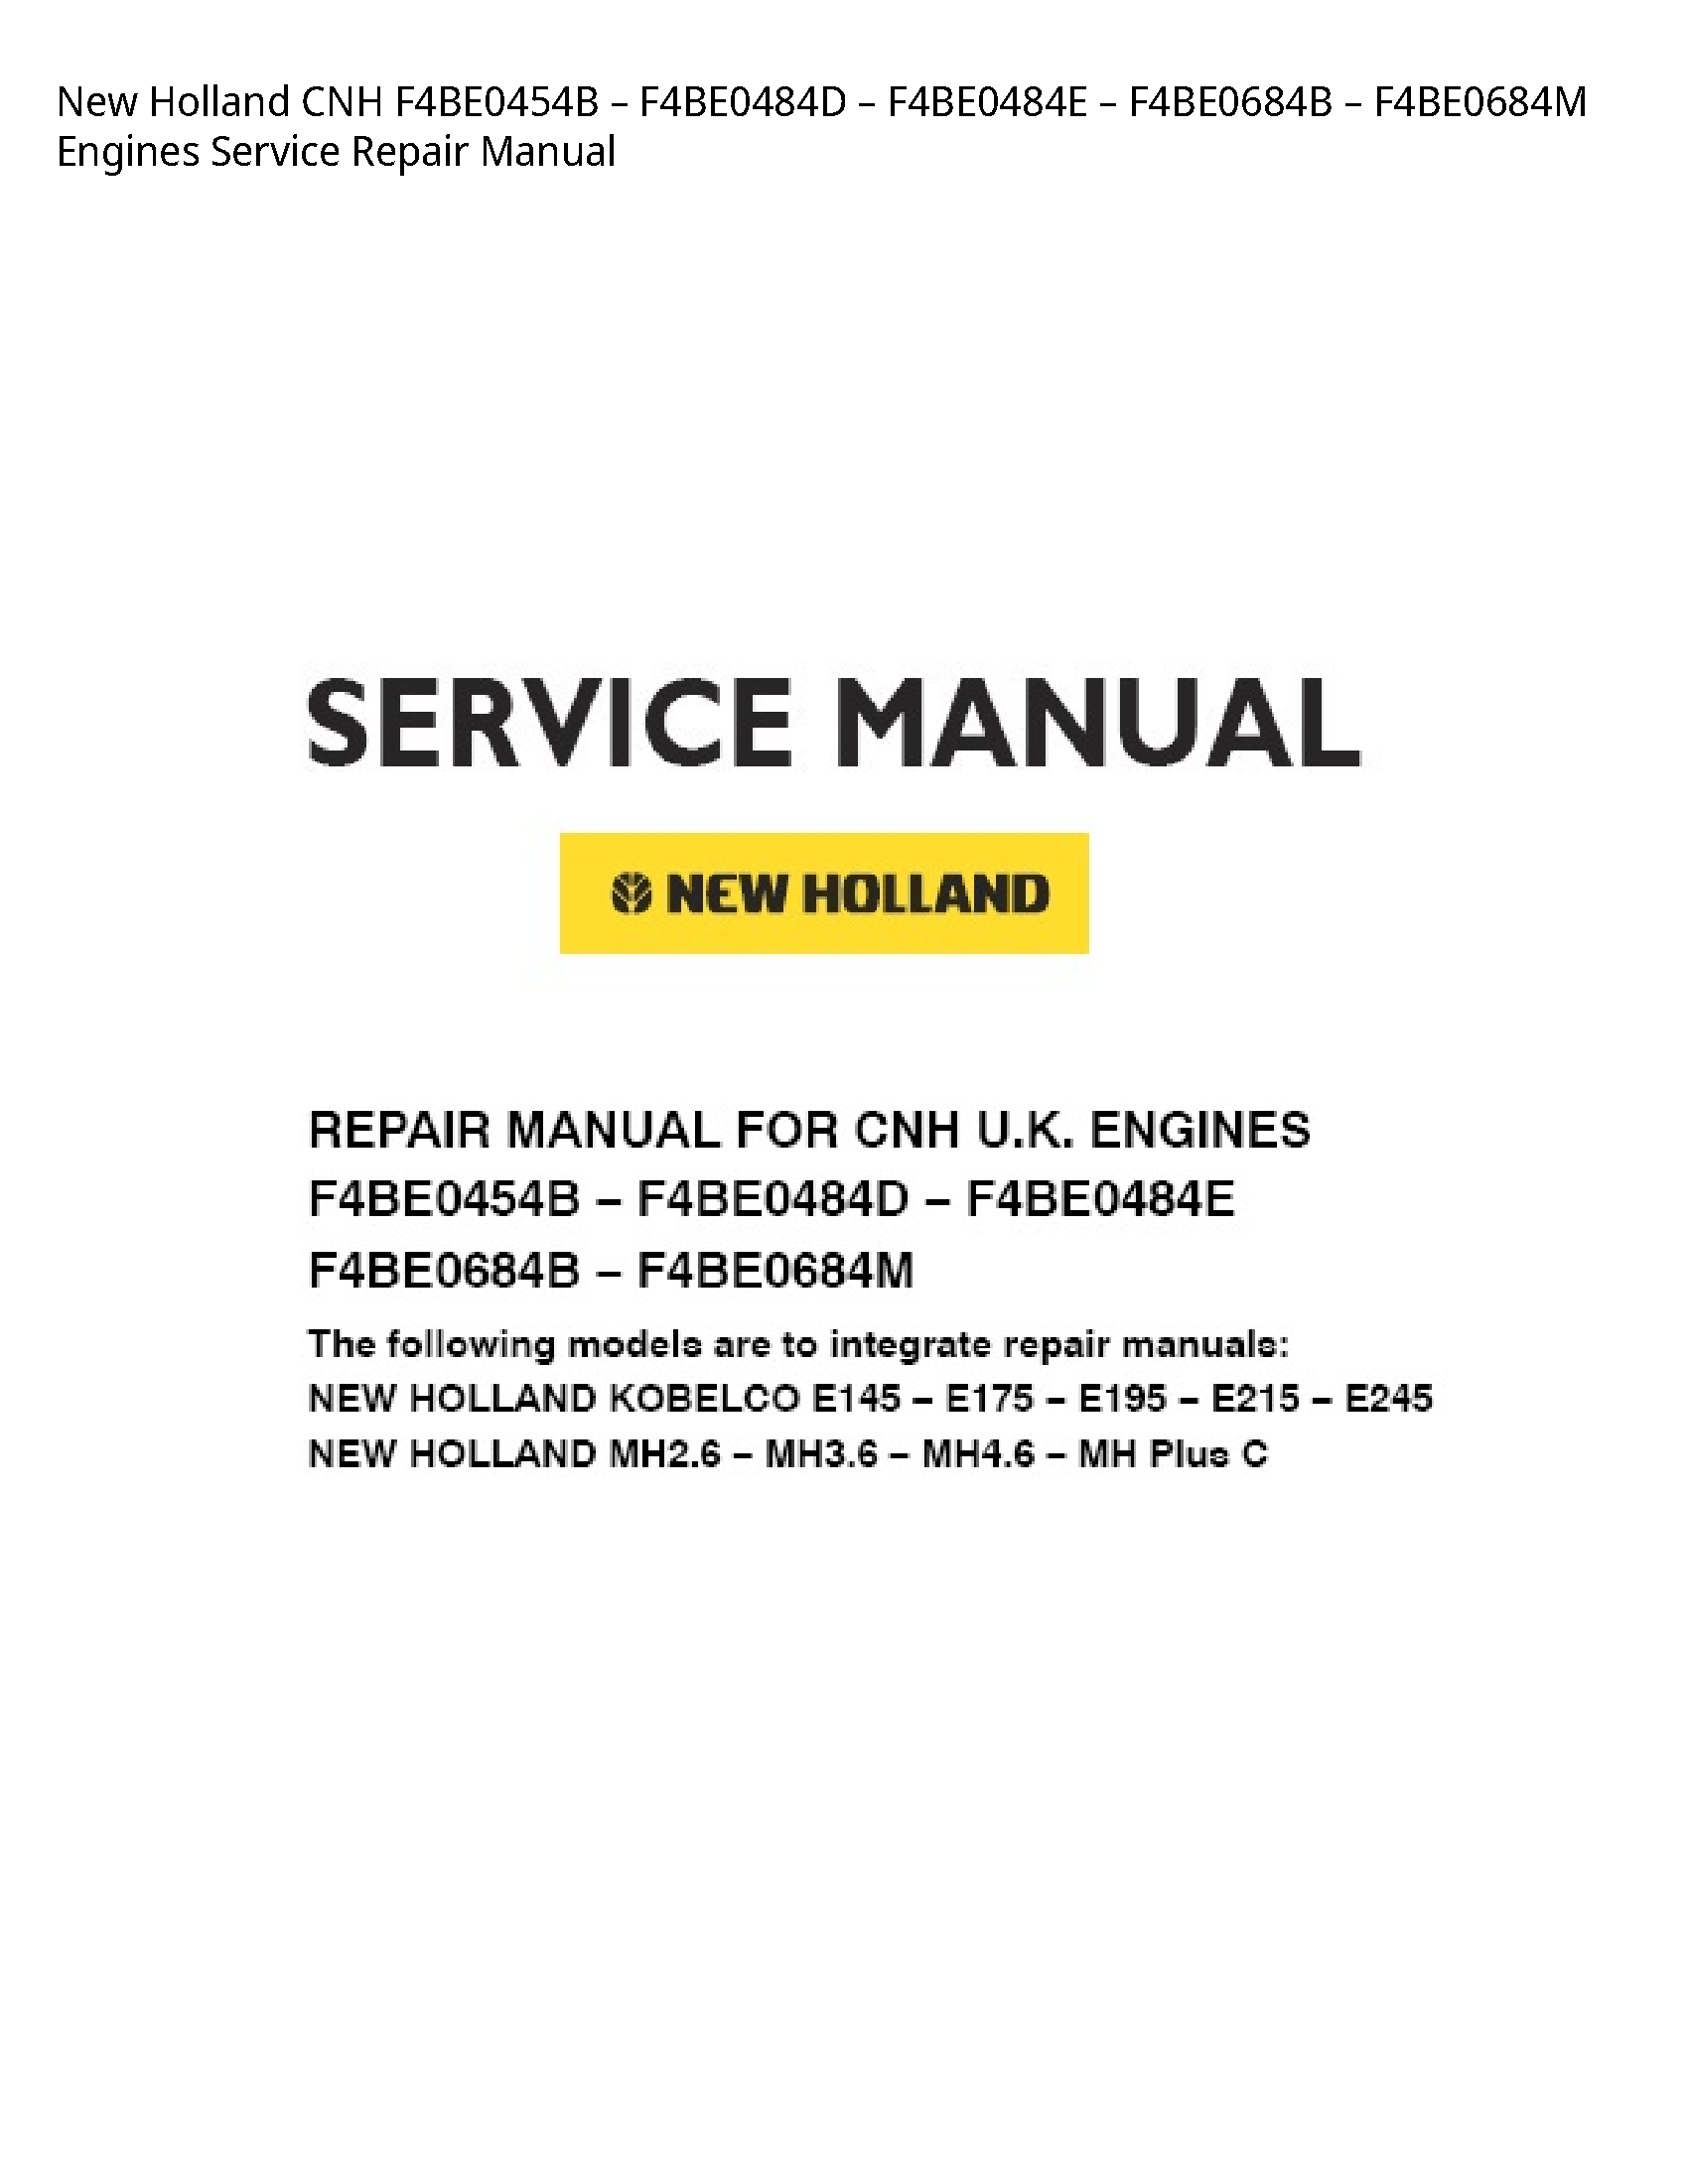 New Holland F4BE0454B CNH Engines manual